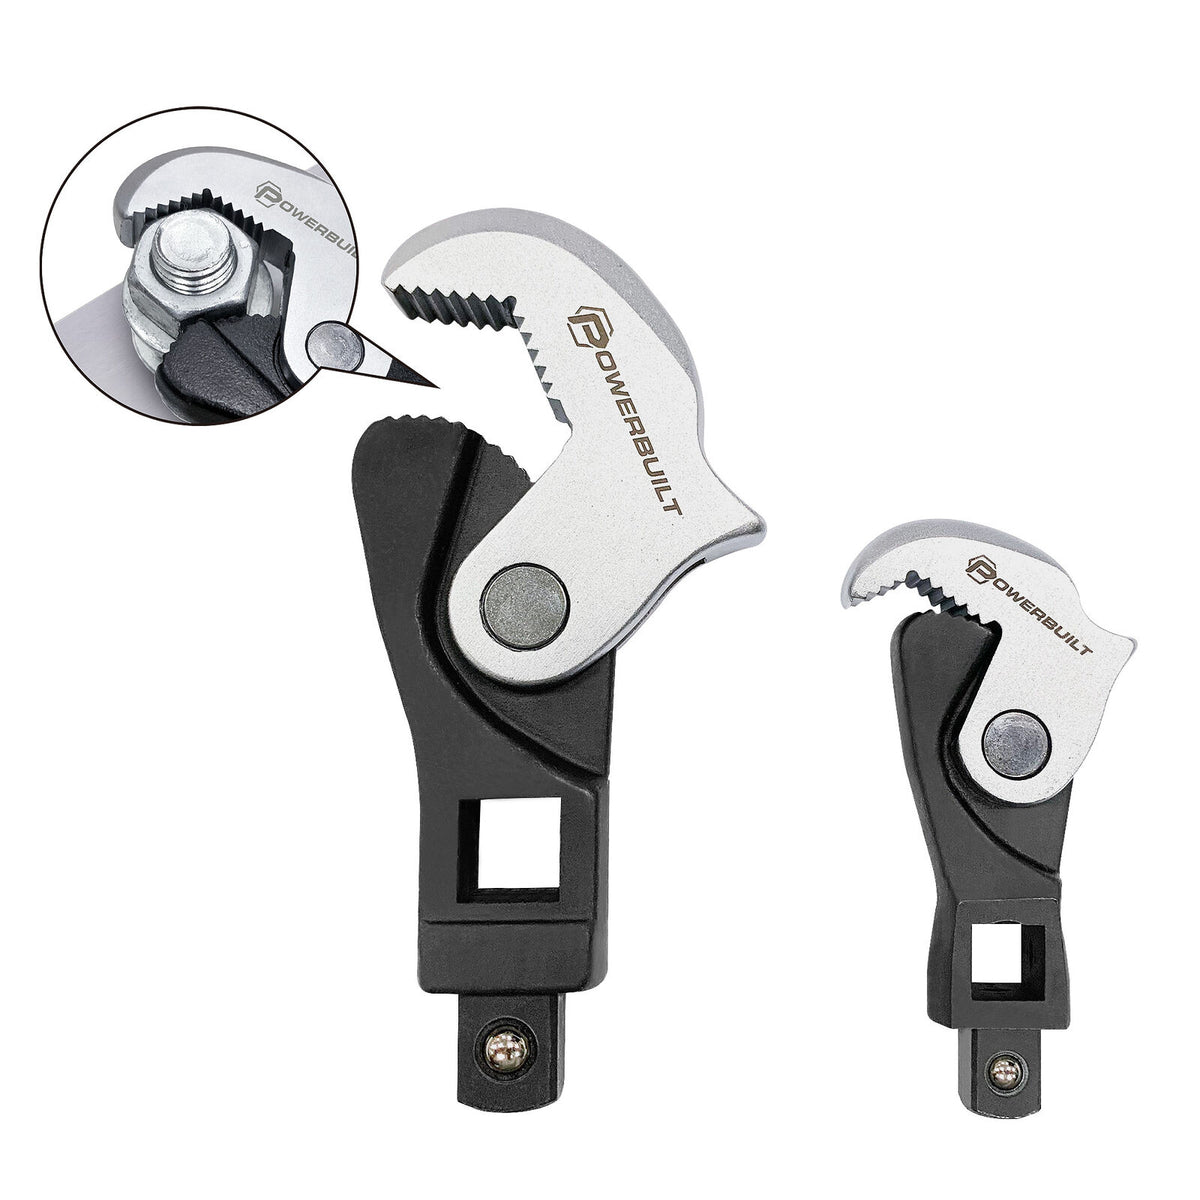 2 Piece Spring Crowfoot Wrench Set